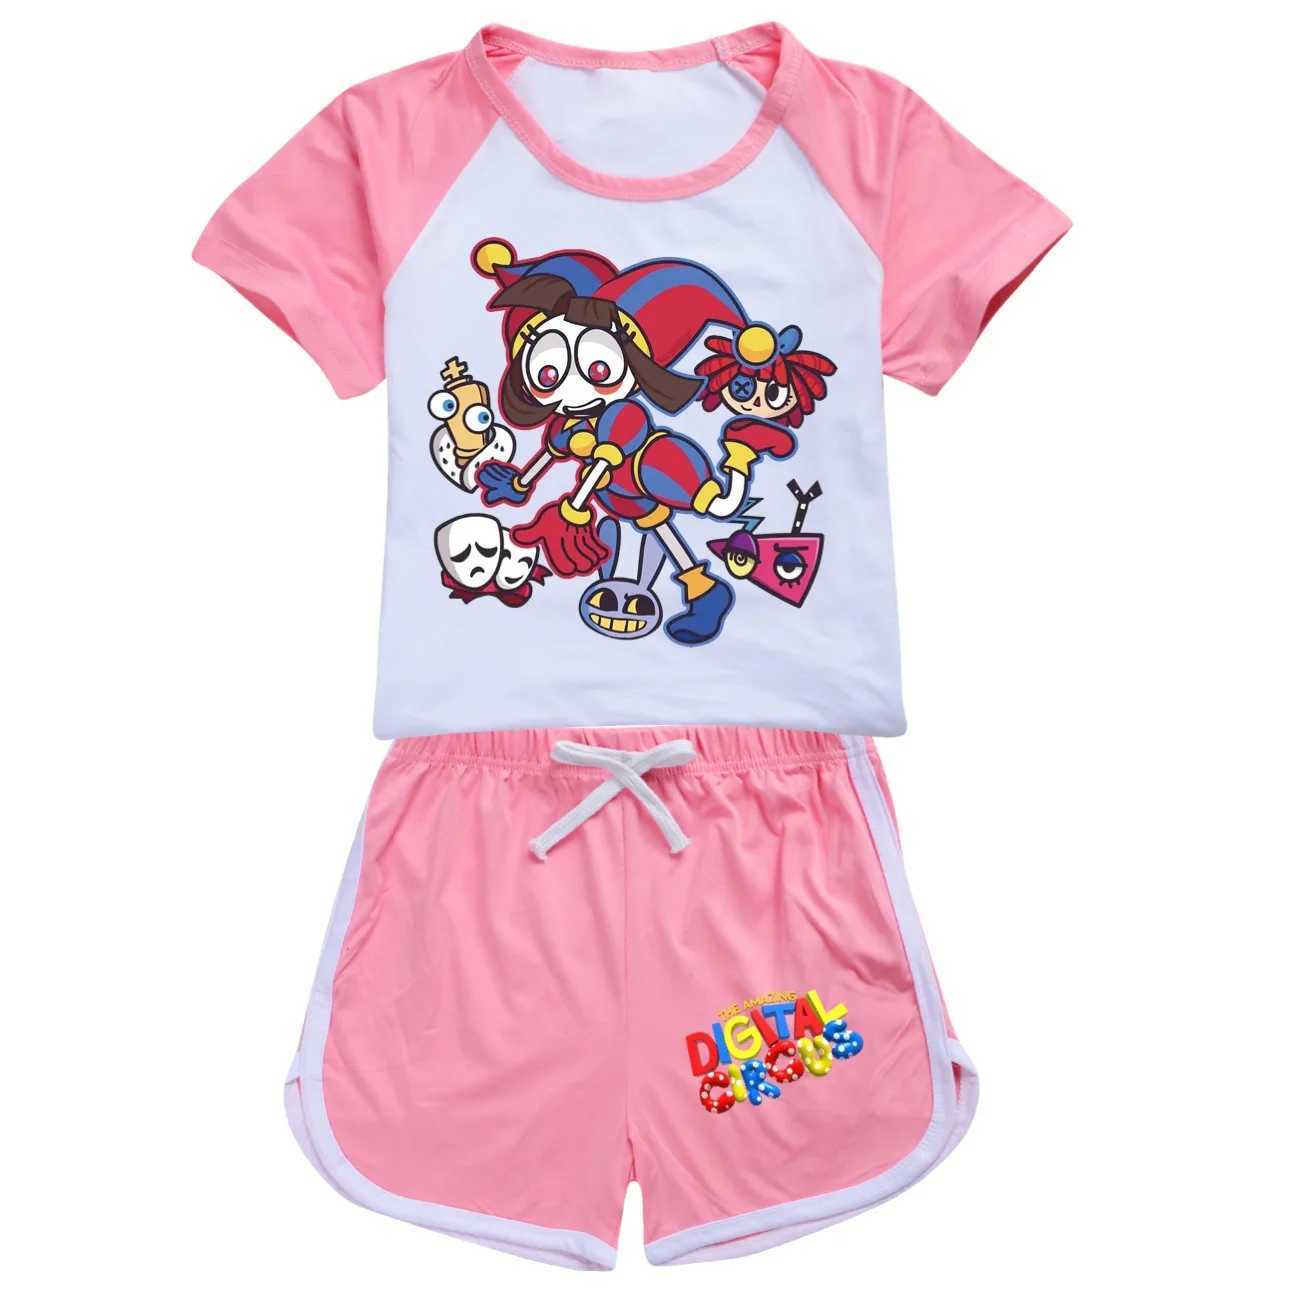 T-shirts Funny Children T-Shirts Suit The Amazing Digital Circus Short Sleeve Top Boys Girls Sports Pants Casual Clothes Spring SummerL2404